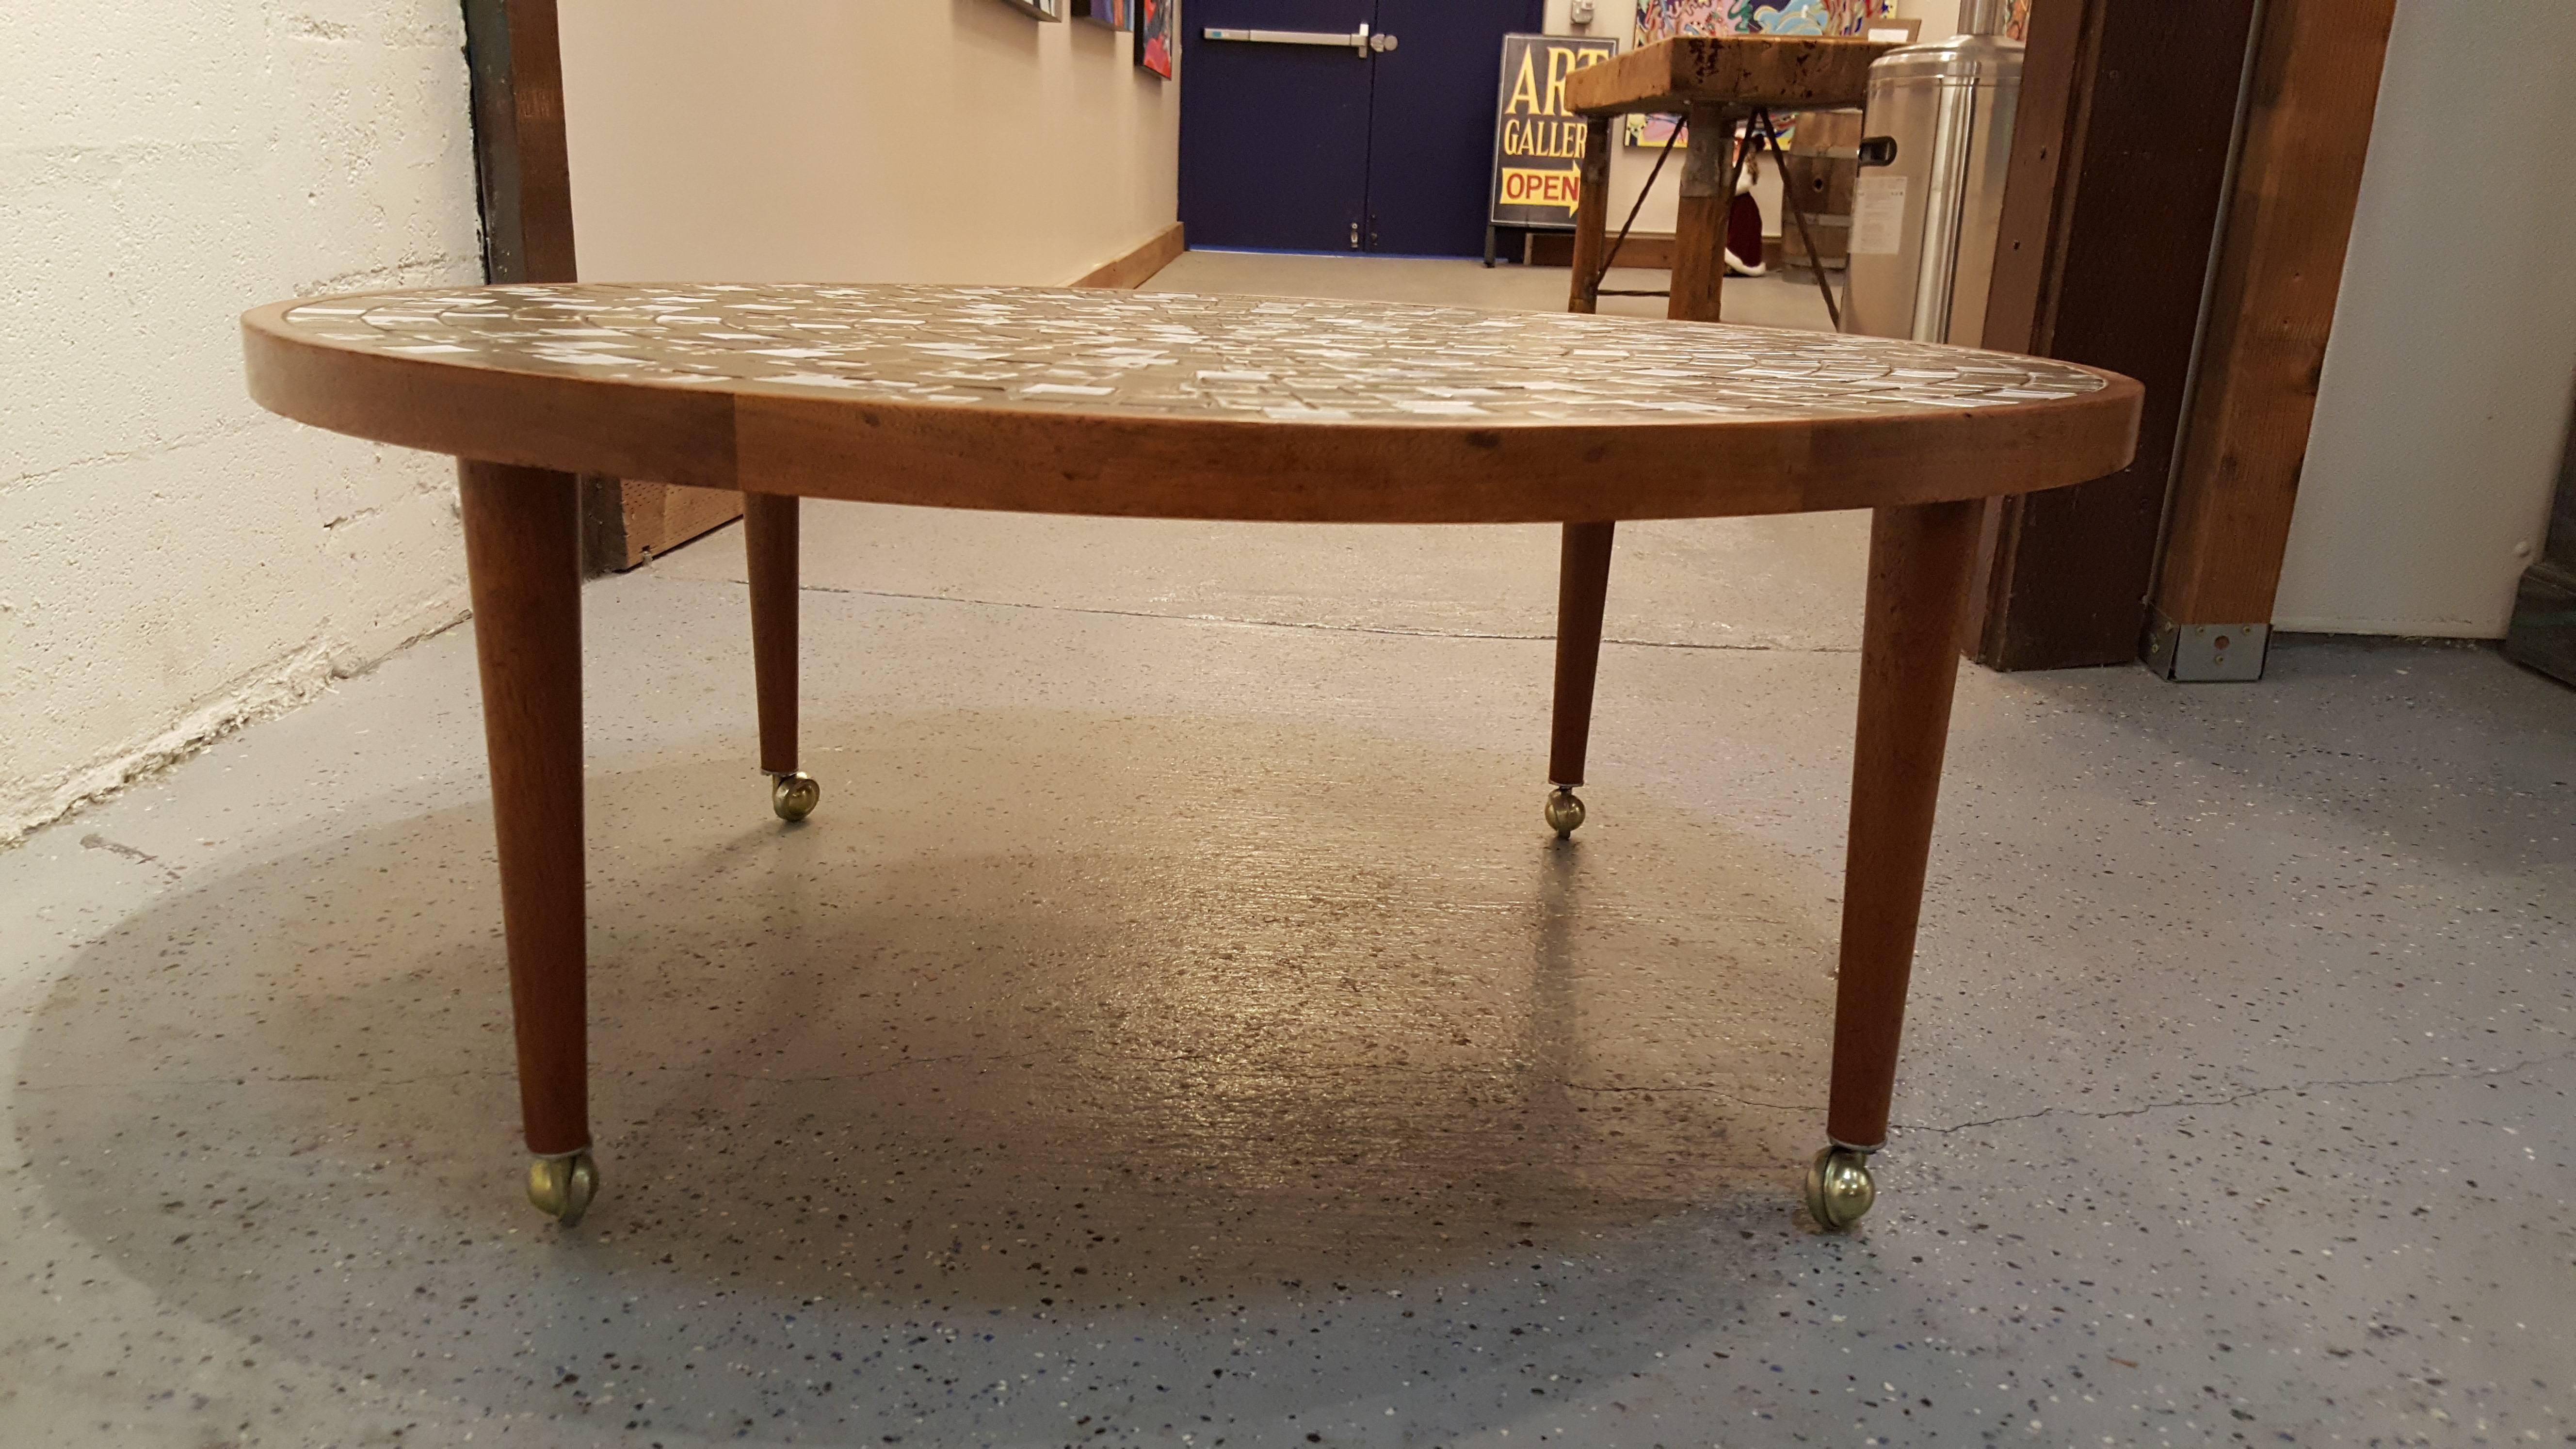 Circular Mosaic Tile Coffee Table by Gordon and Jane Martz In Good Condition For Sale In Fulton, CA